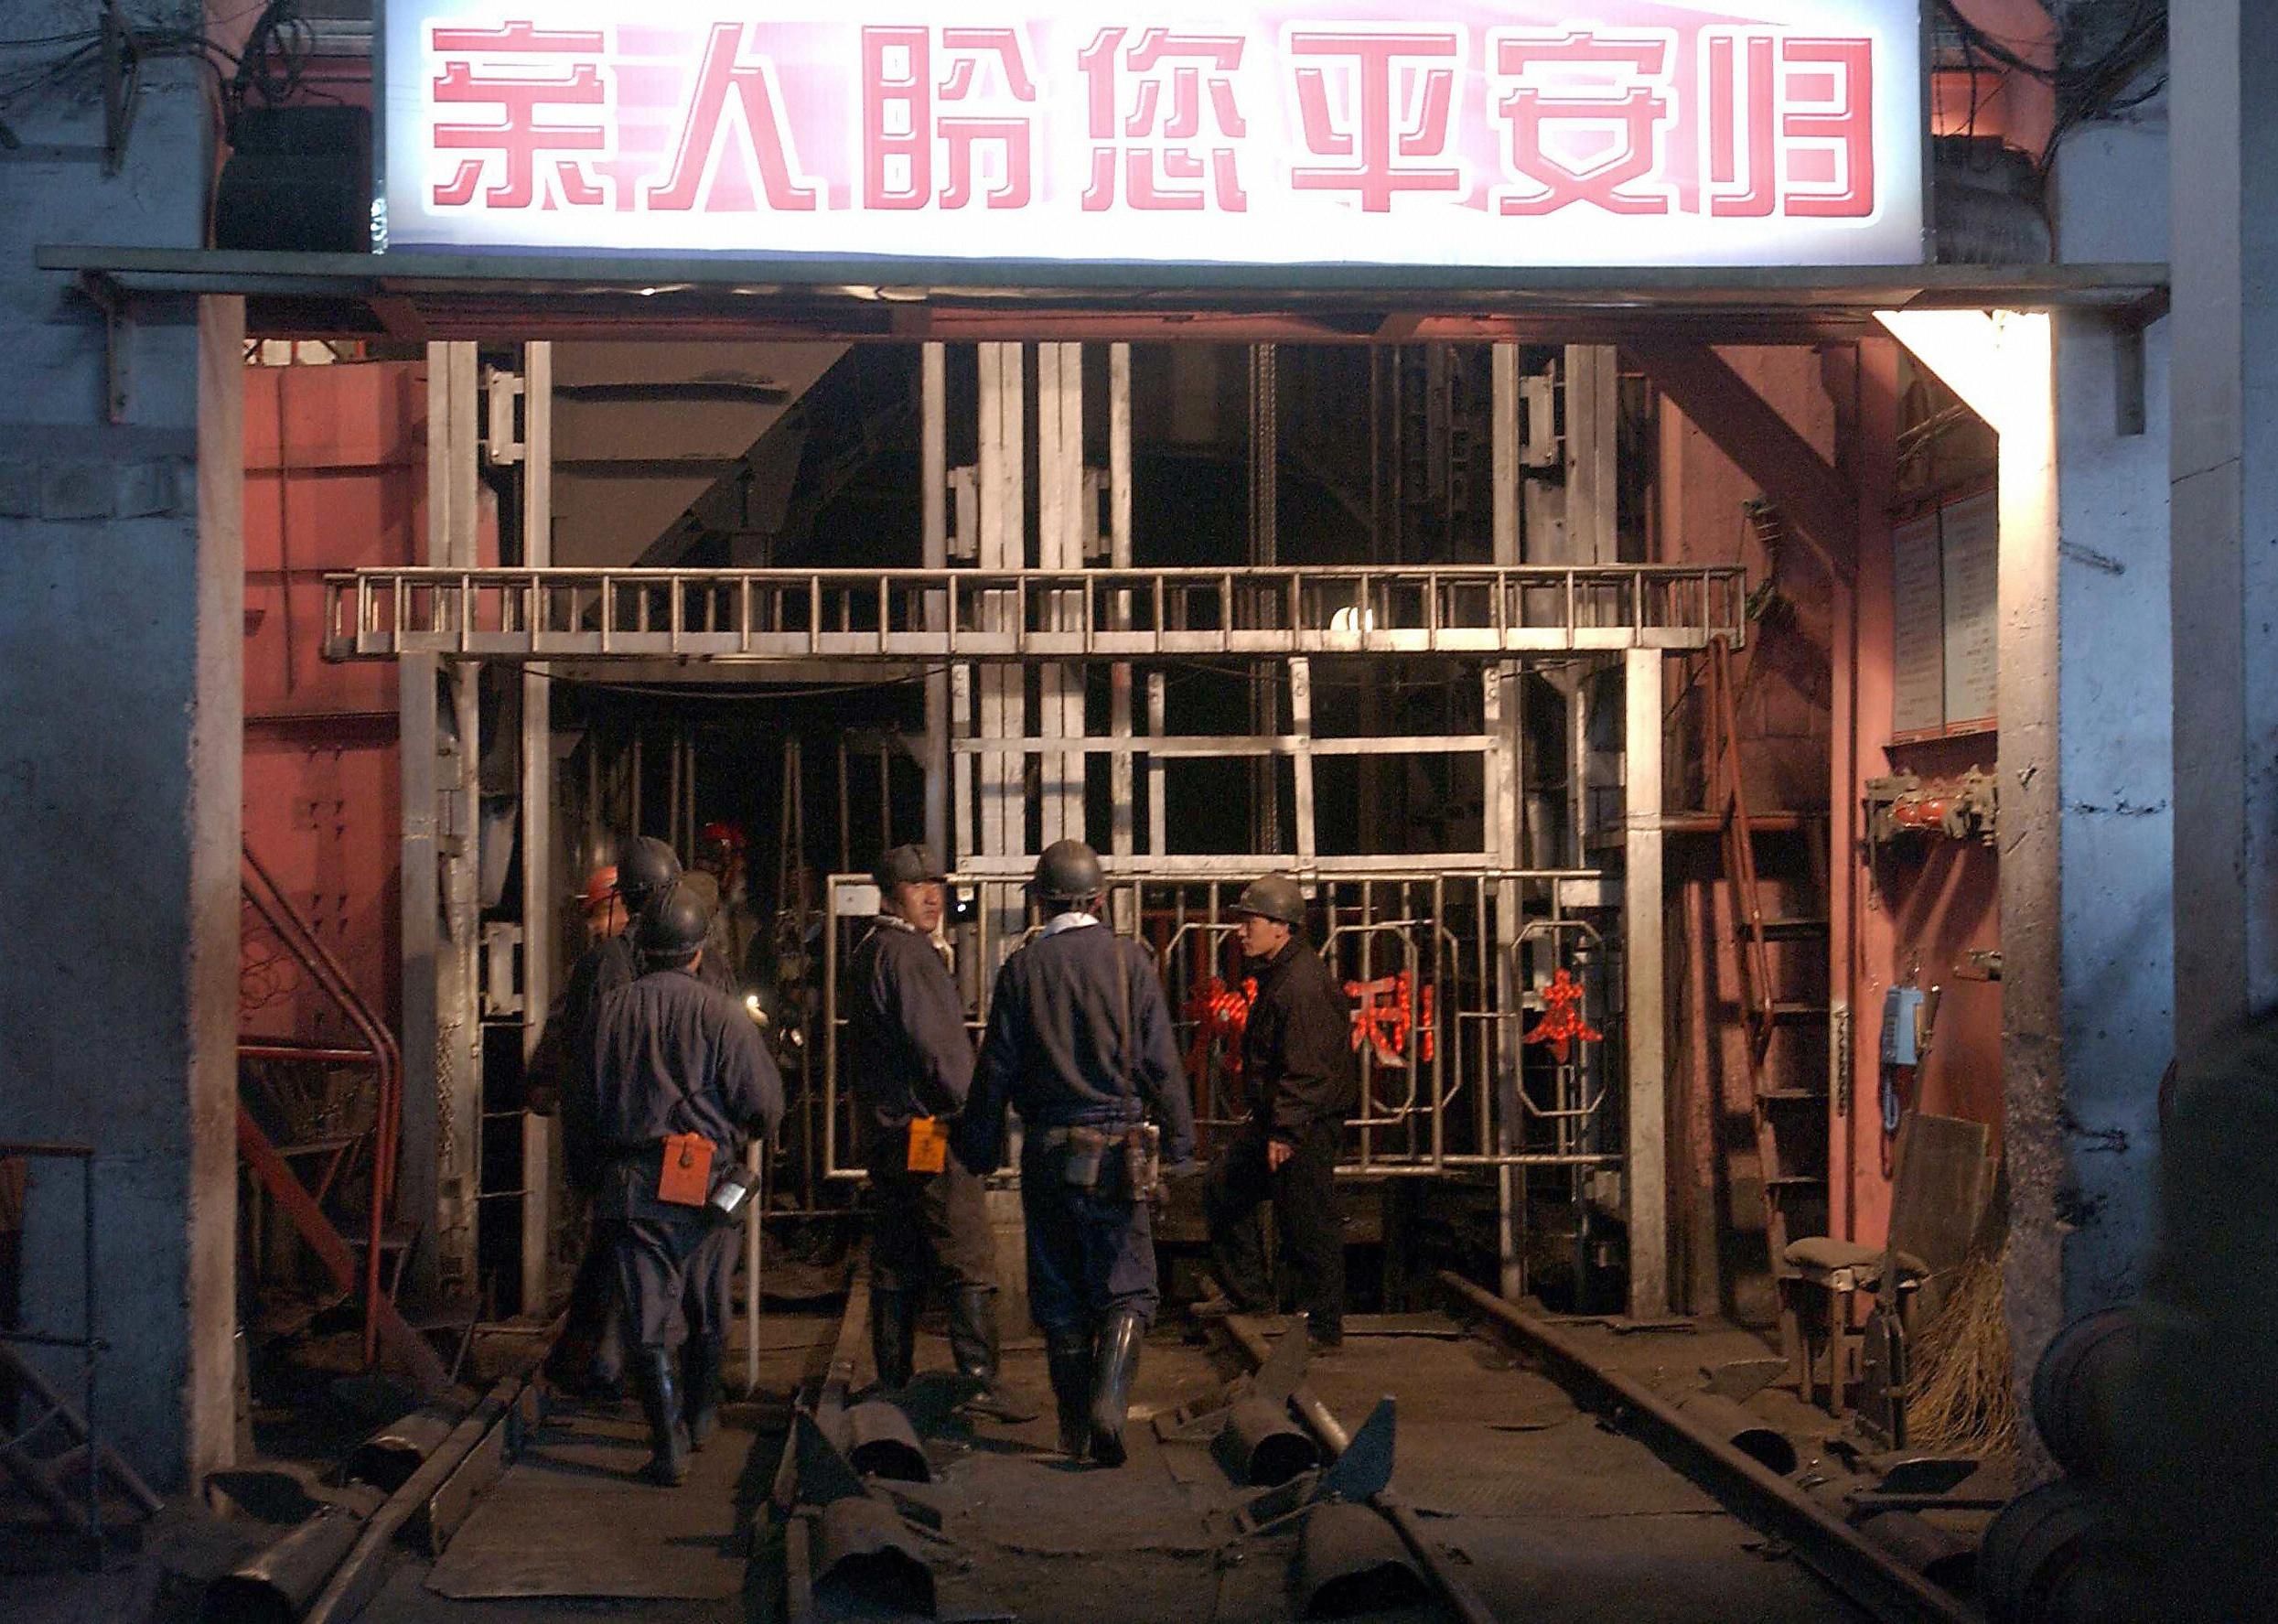 A team of miners prepare to enter into the Sujiawan colliery in Fuxin city.